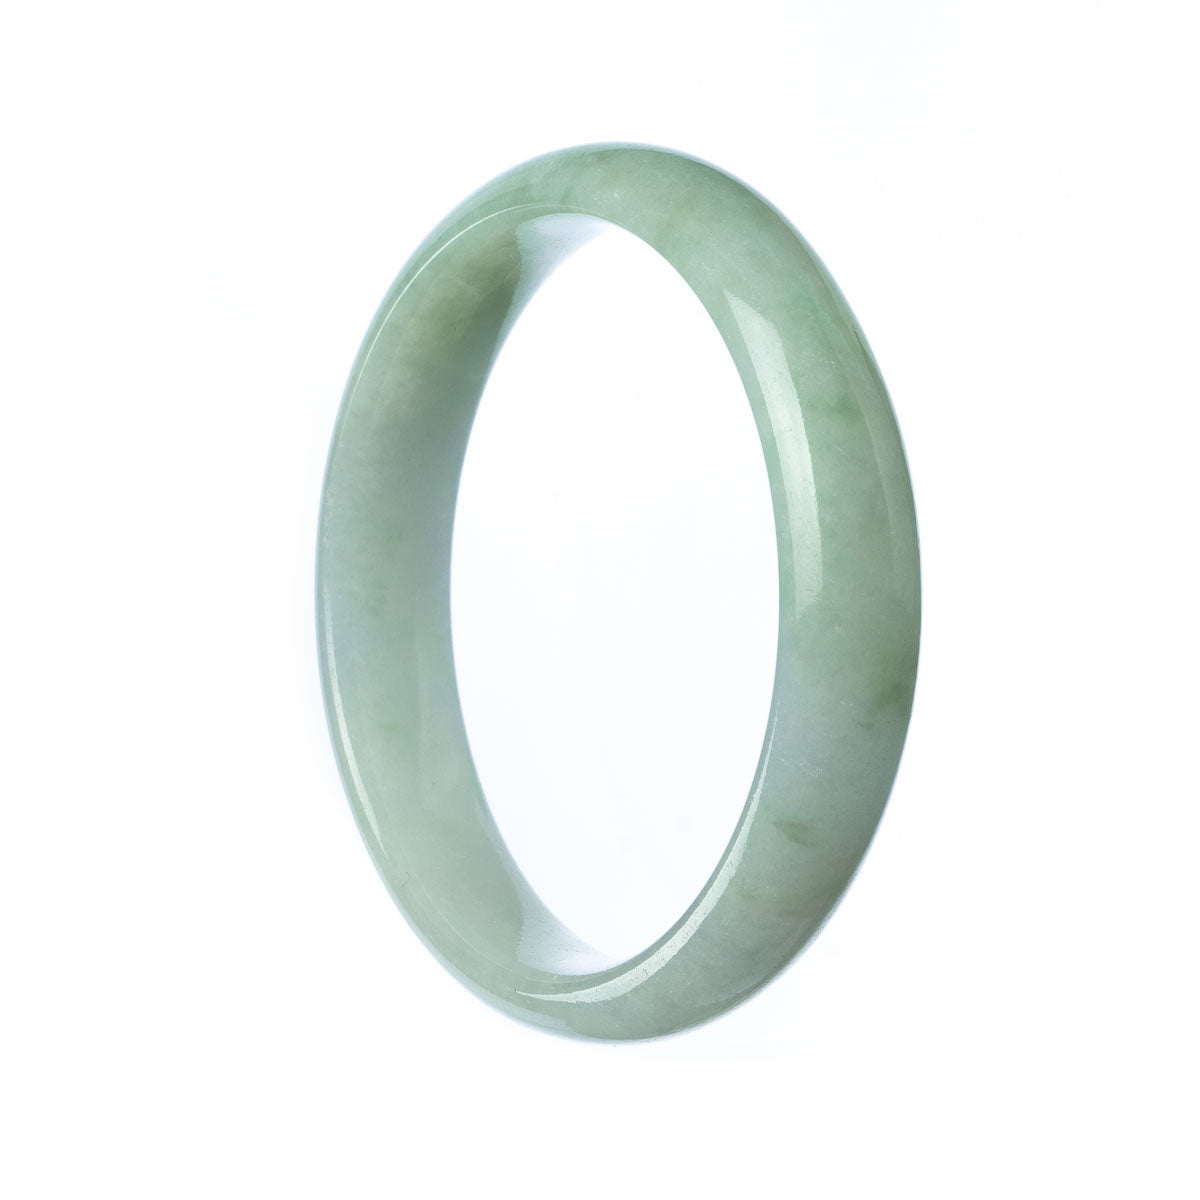 A close-up image of a pale green jadeite jade bangle bracelet with a half moon shape, certified as a natural gemstone. The bracelet measures 57mm in diameter and is adorned with the brand name "MAYS™".